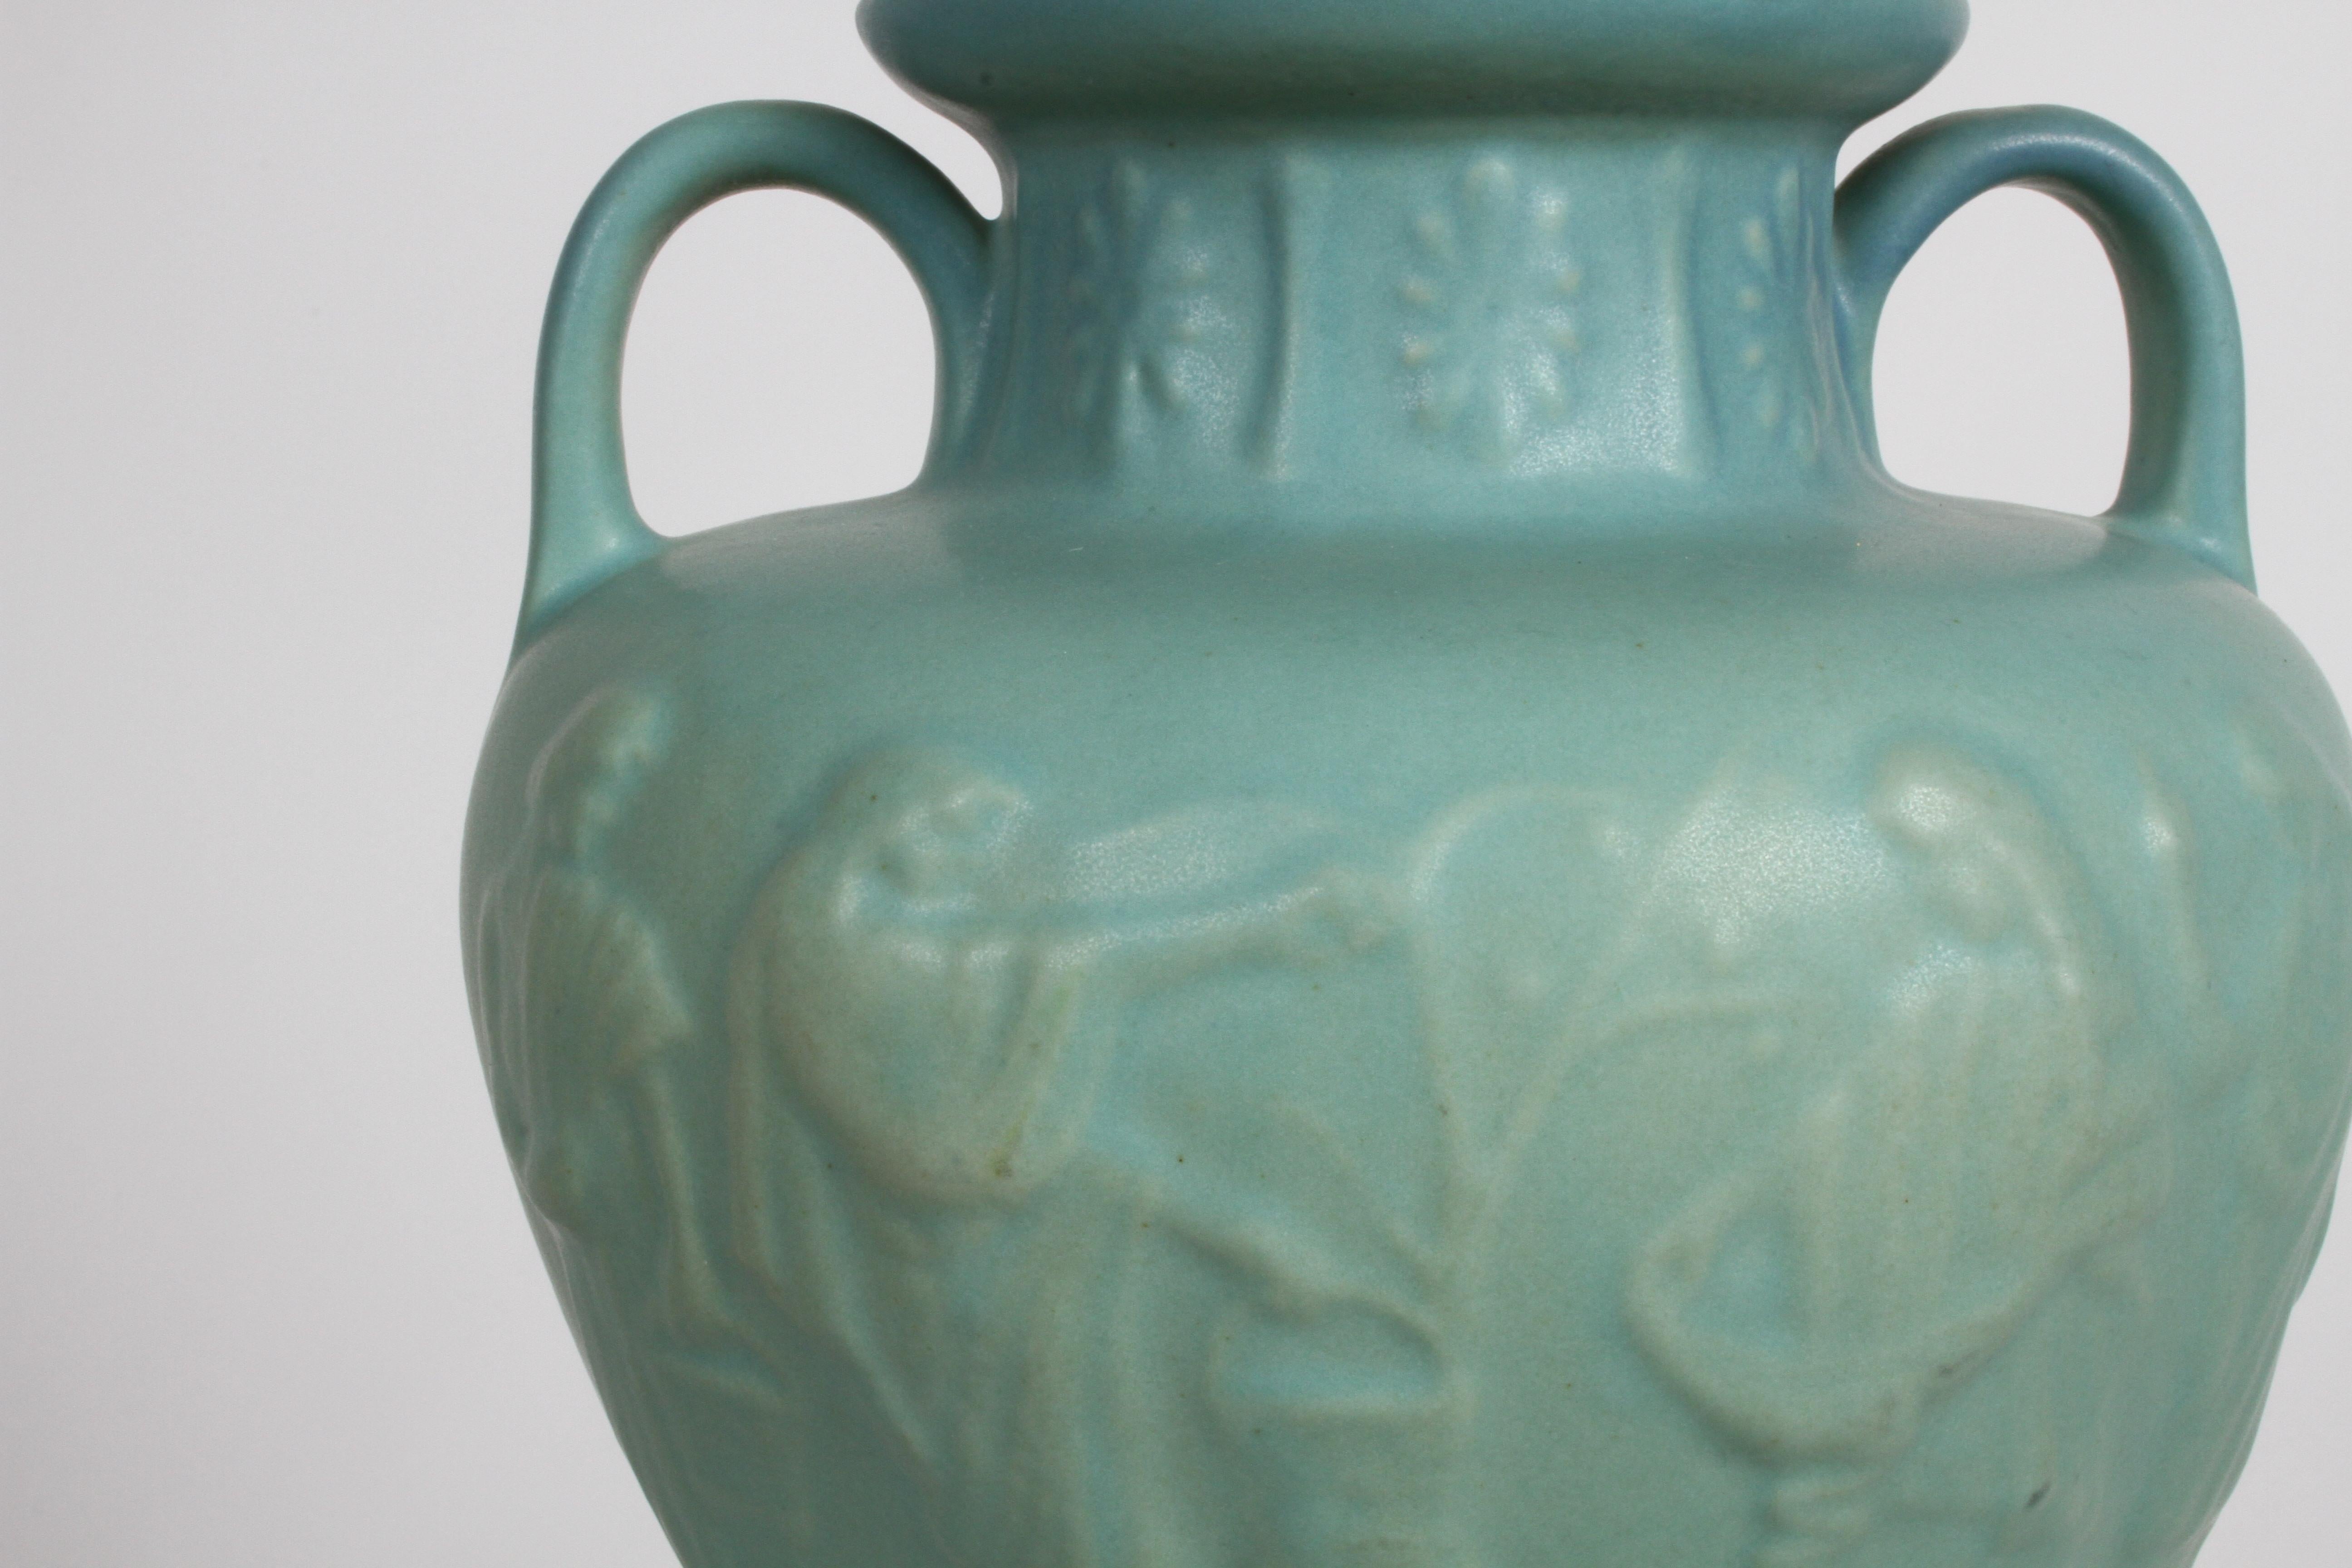 Circa 1980s Van Briggle Grecian urn with turquoise ming glaze signed by the potter Dorothy Ruff (D.R.) The urn has a high shoulder with loop handles, figures in low relief at the circumference, and a floral pattern at the short neck below a flared